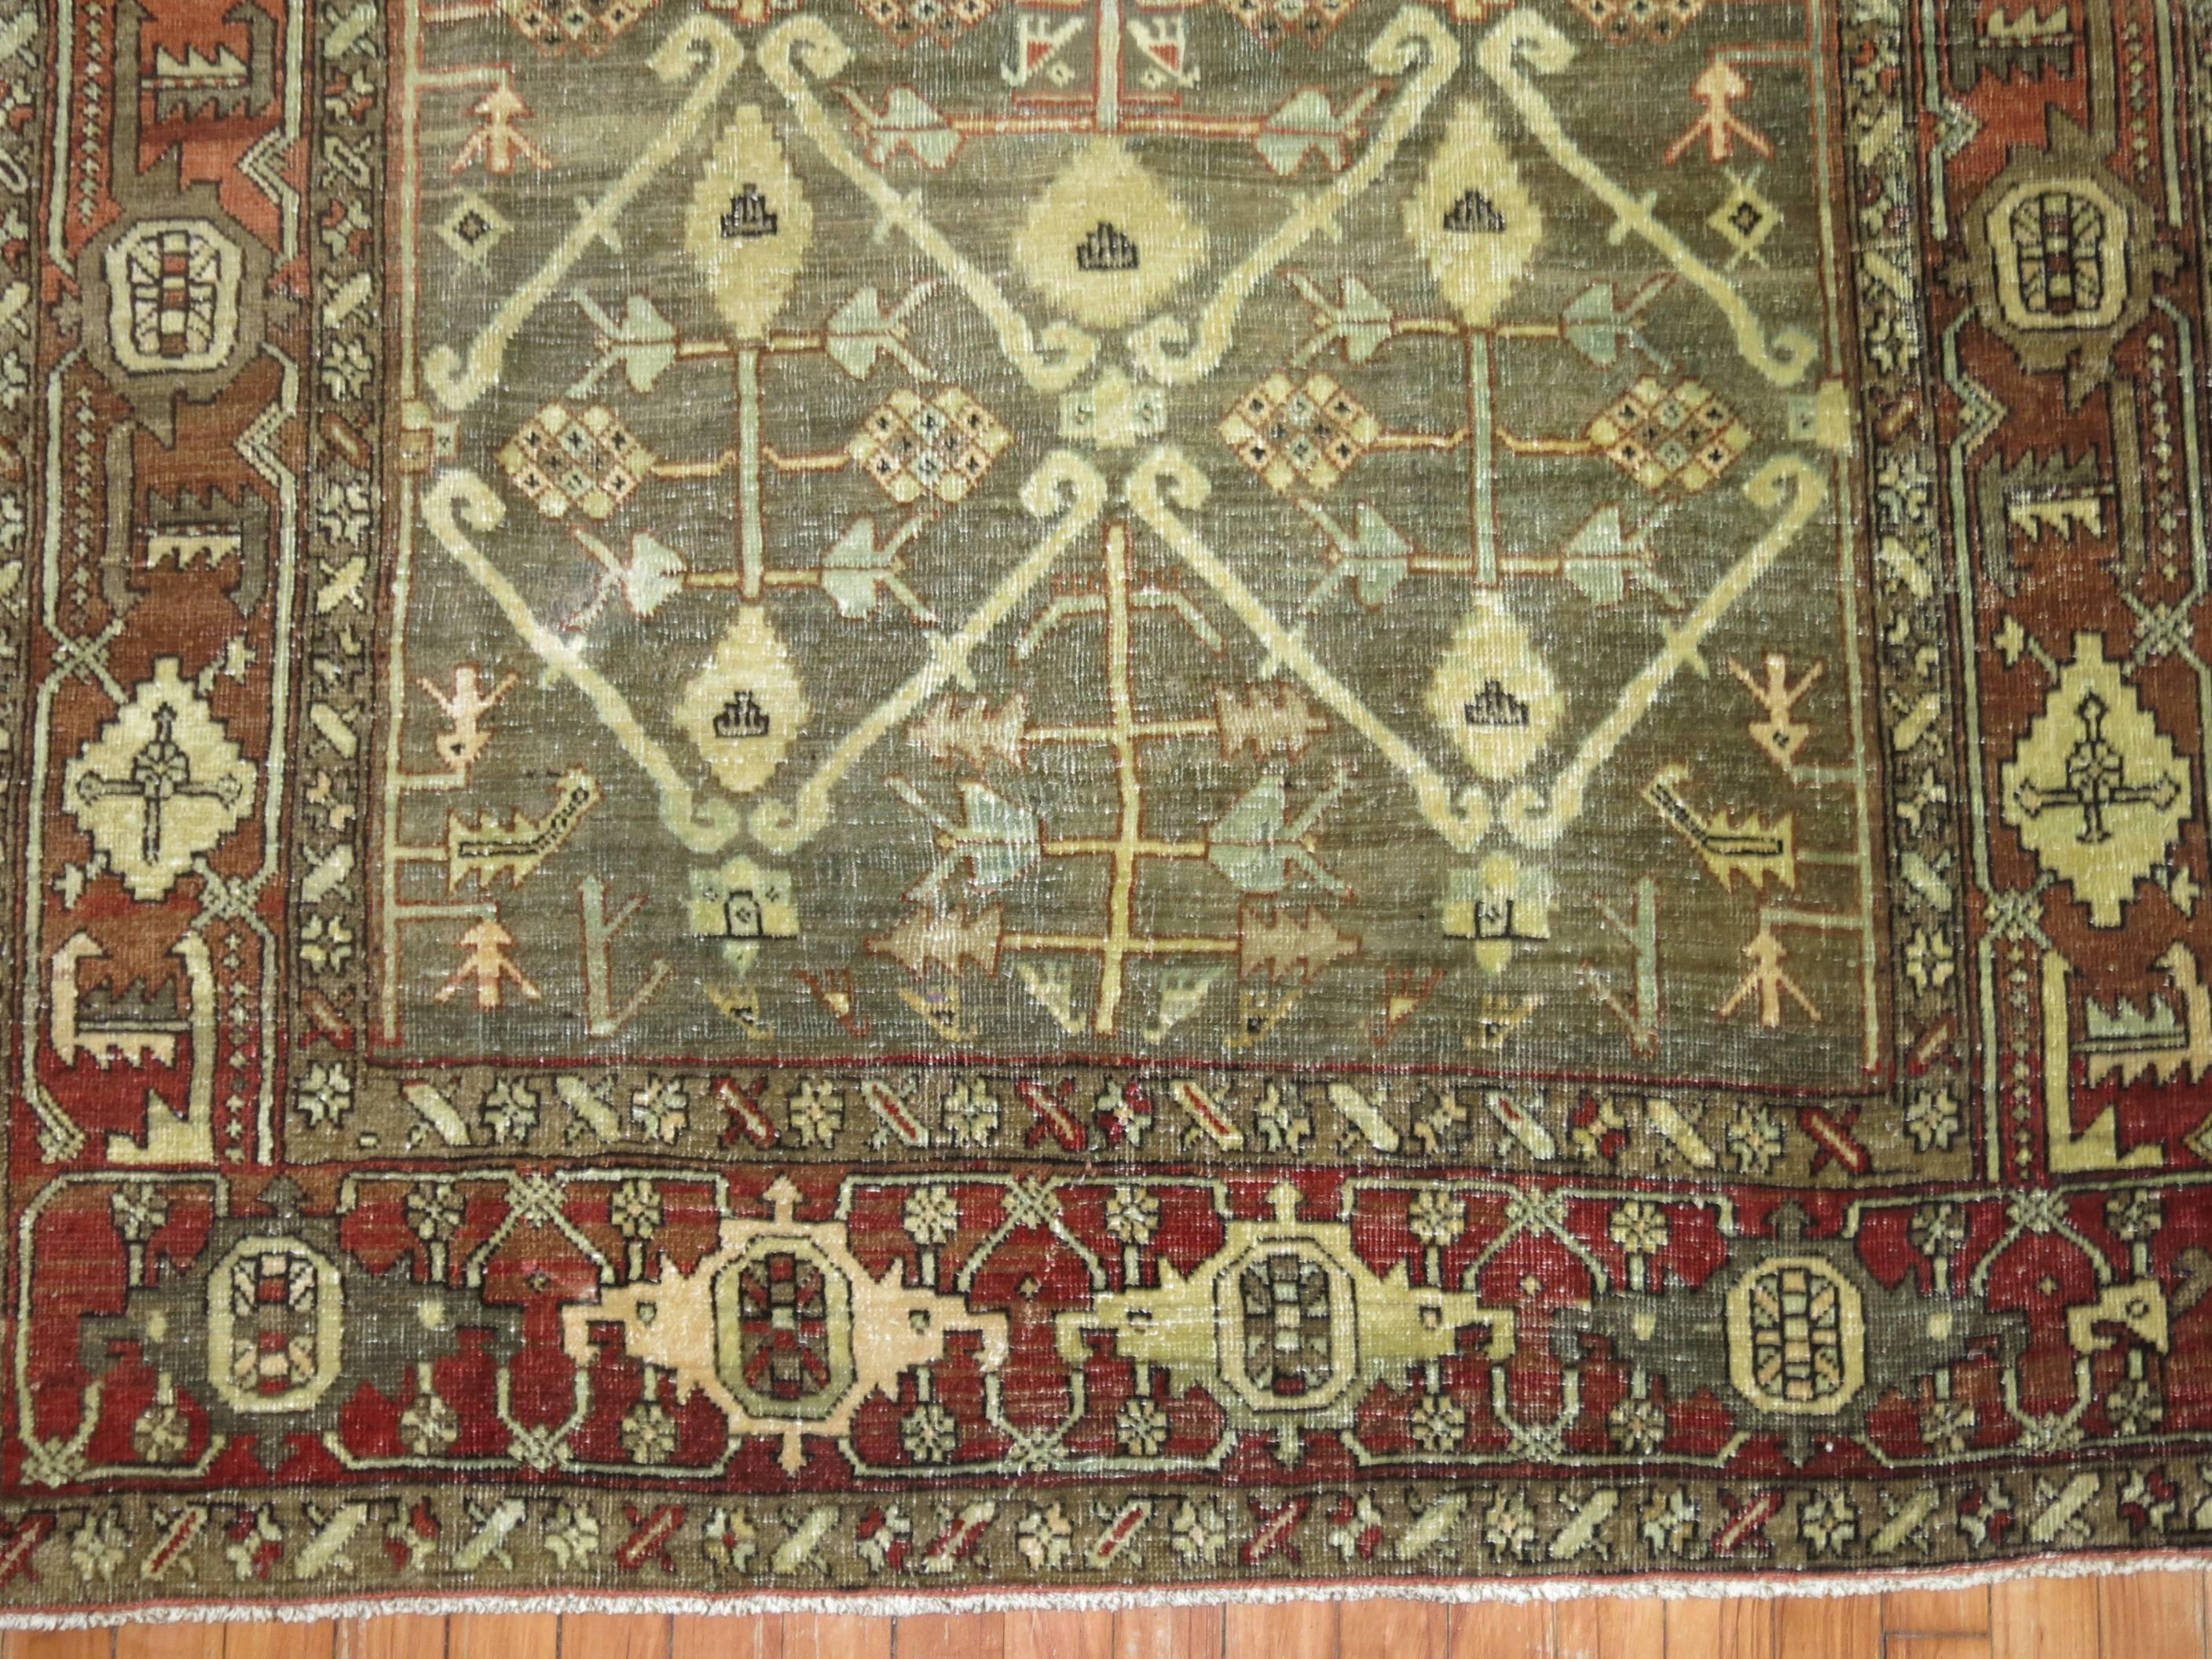 Fine quality Persian Heriz rug with an all-over design in greens and brown,

circa 1920. Measures: 4'4